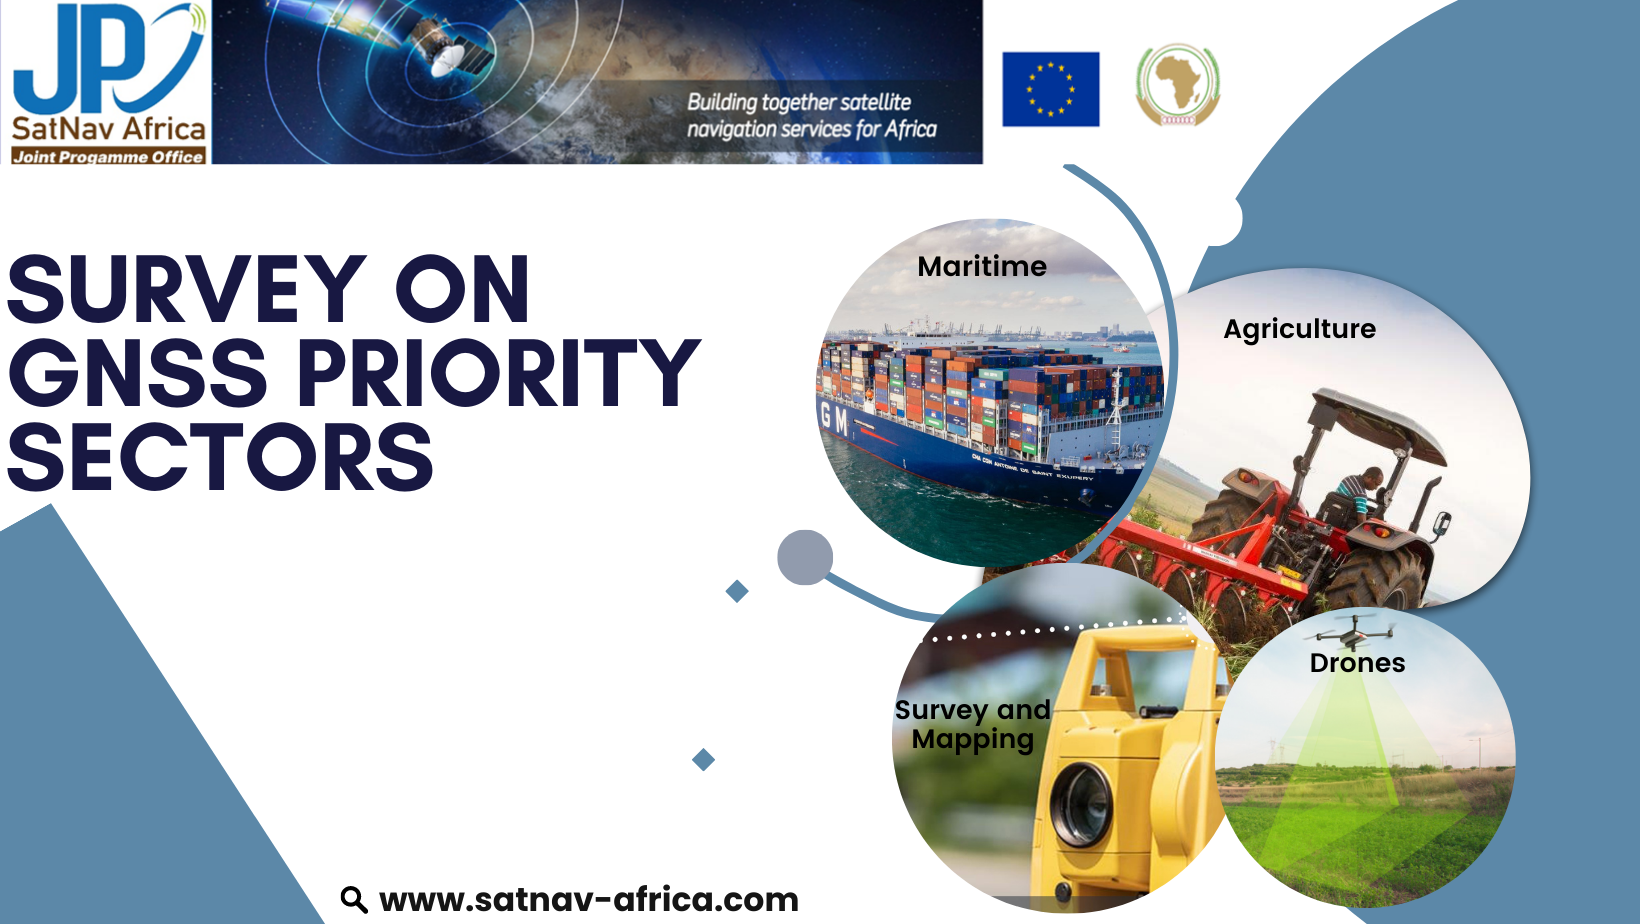 THE SURVEY ON GNSS PRIORITY SECTORS